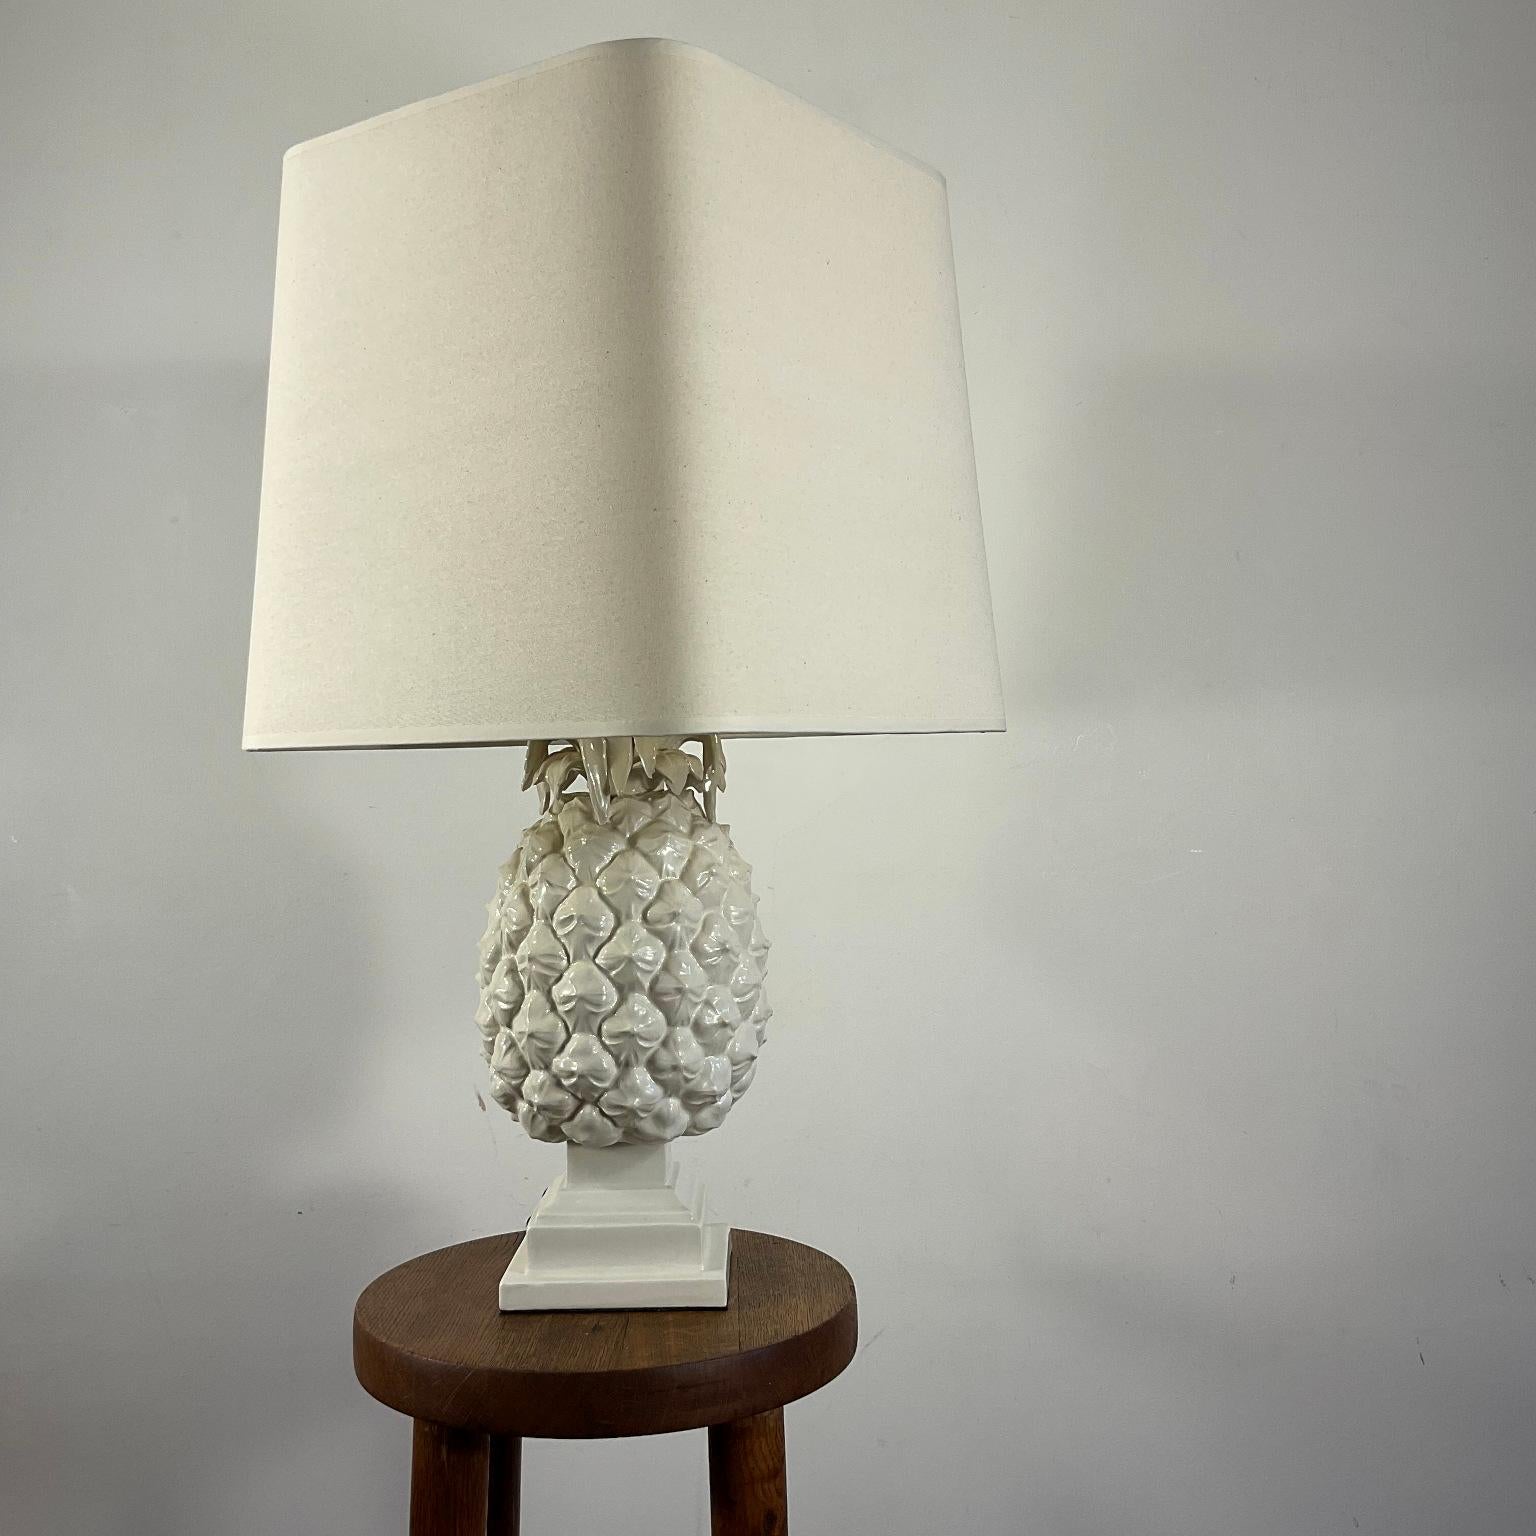 White glazed ceramic pineapple table lamp from the 1970s with three lights that can be turned on individually by two switches. Includes a lampshade that has been refurbished.